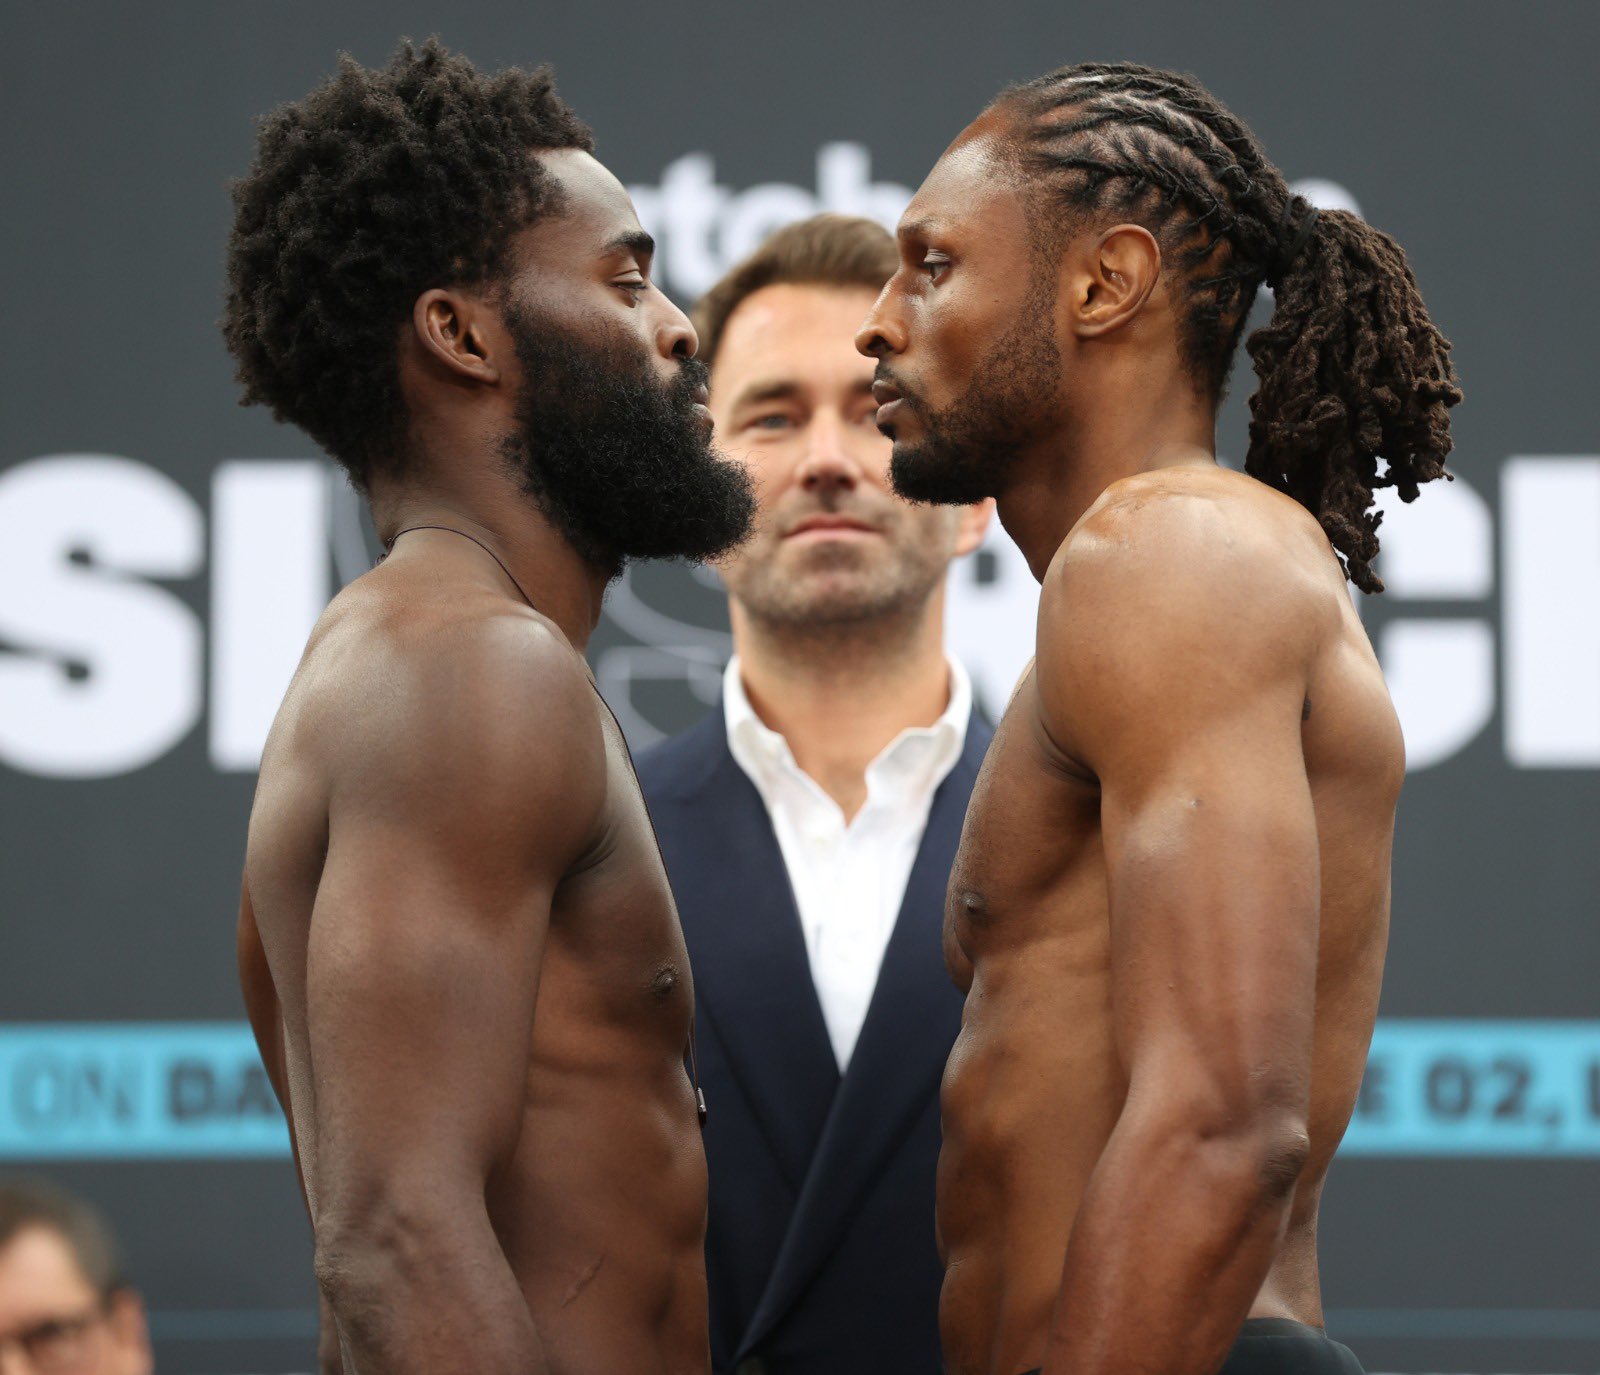 Buatsi and Richards both made weight for their WBA eliminator fight